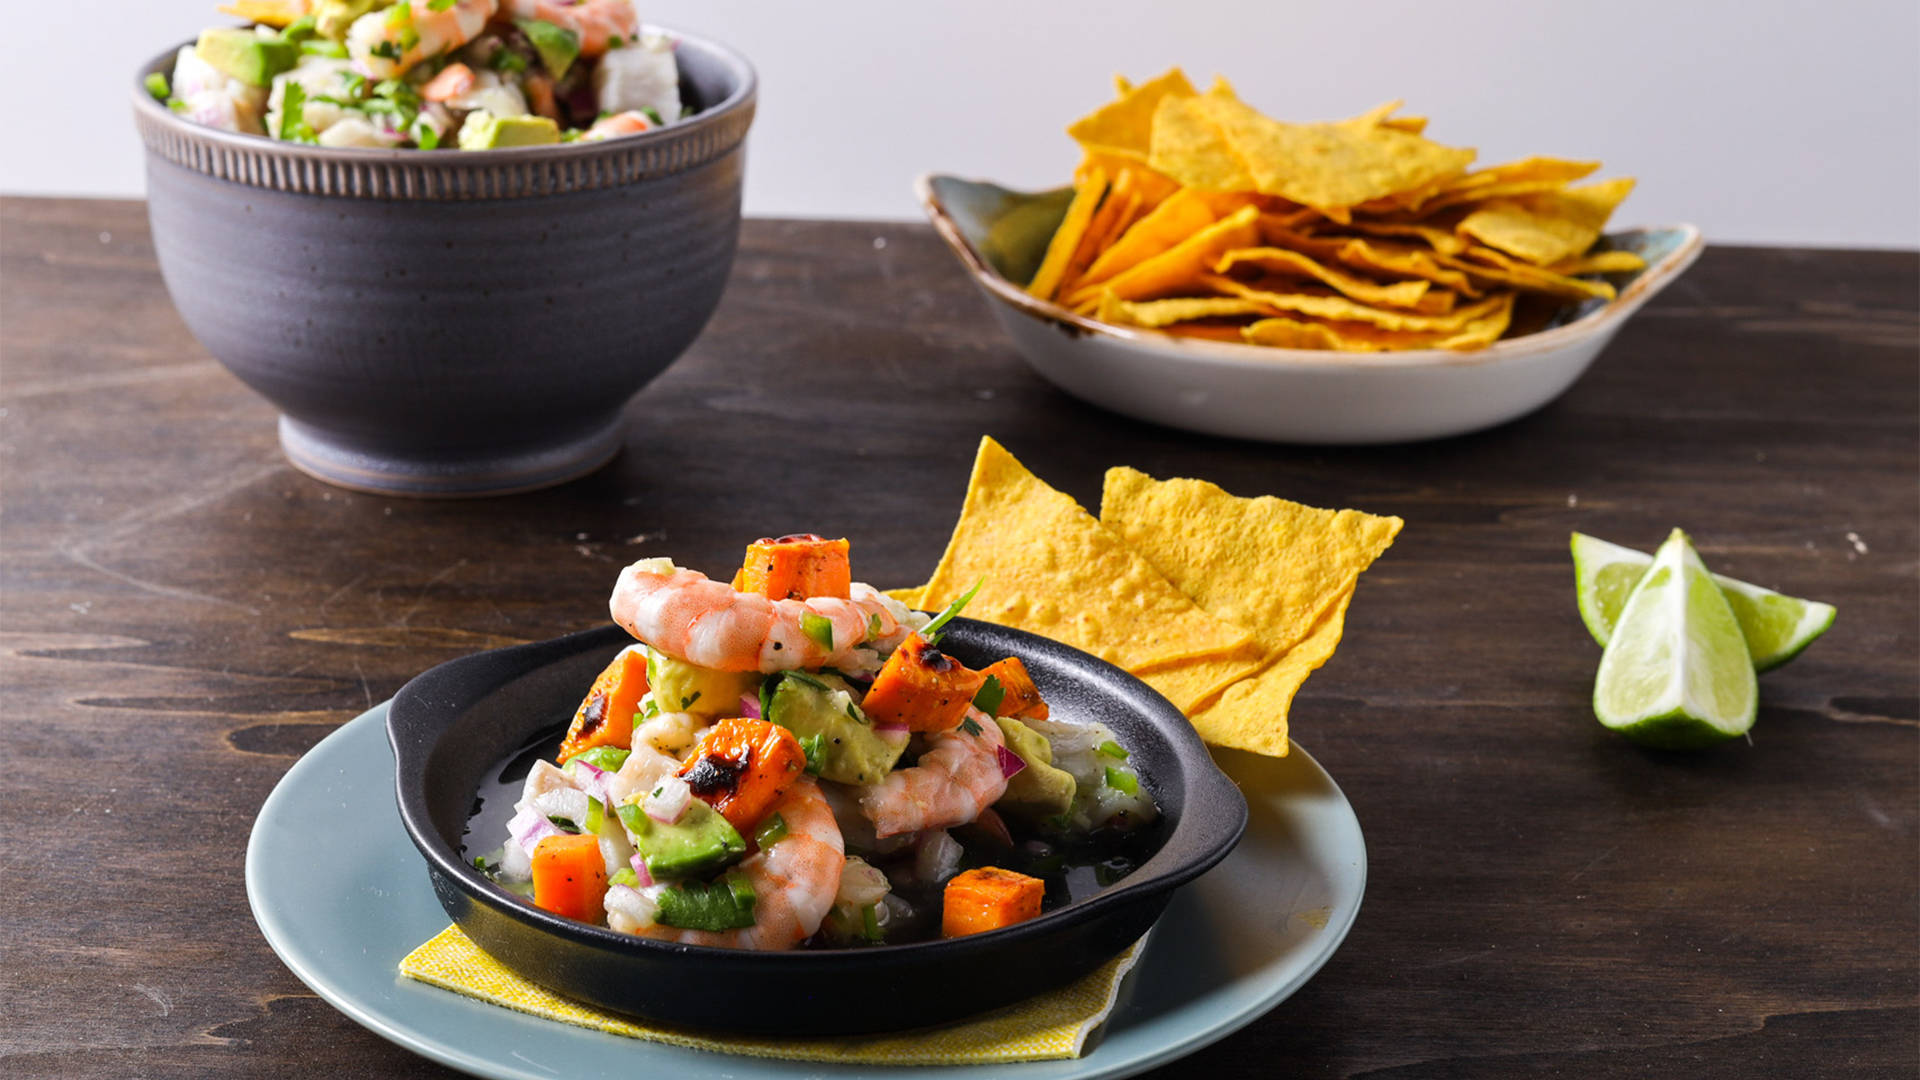 Shrimp And Fish Ceviche With Tortilla Chips Wallpaper